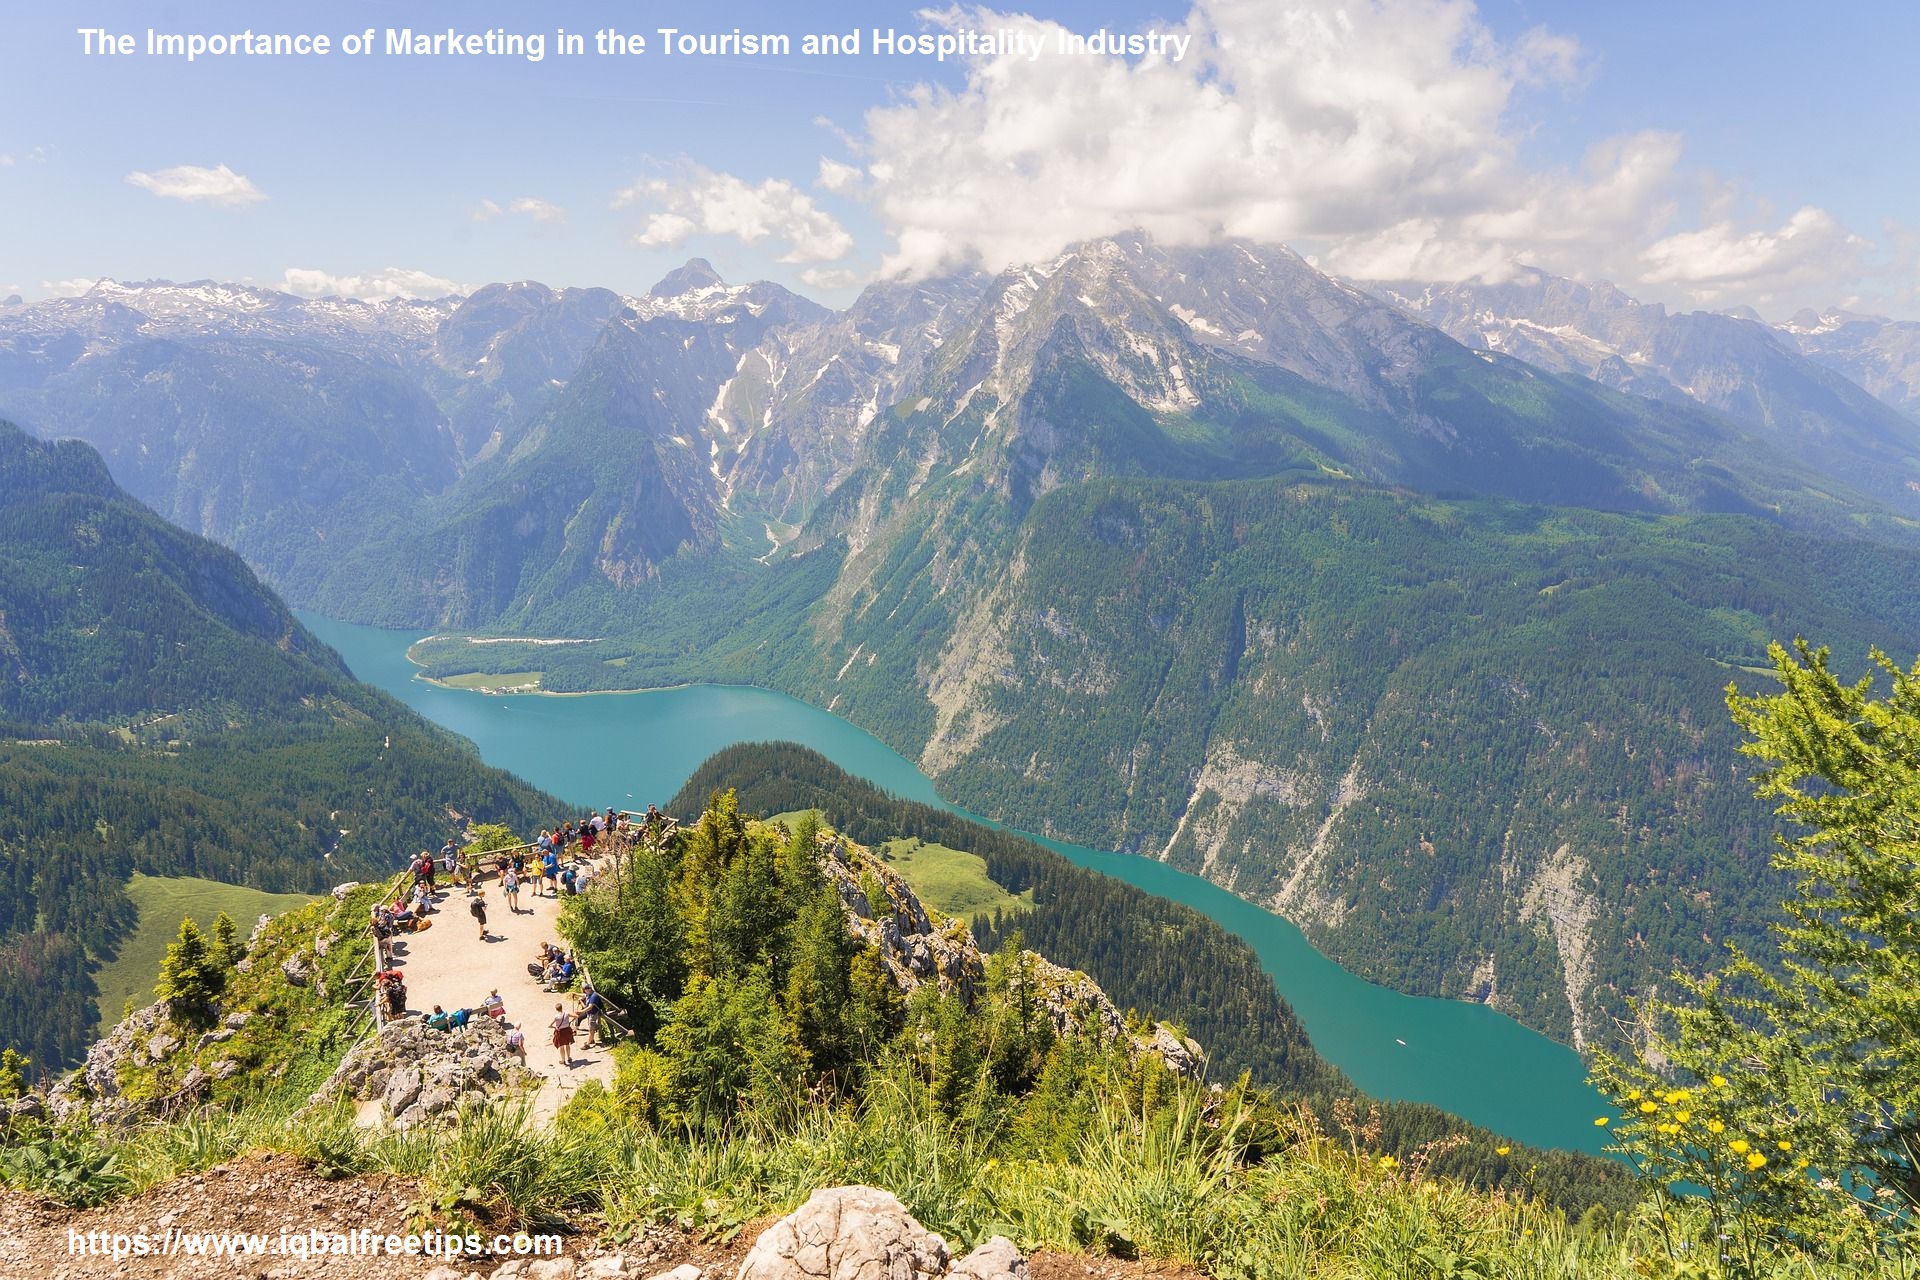 The Importance of Marketing in the Tourism and Hospitality Industry